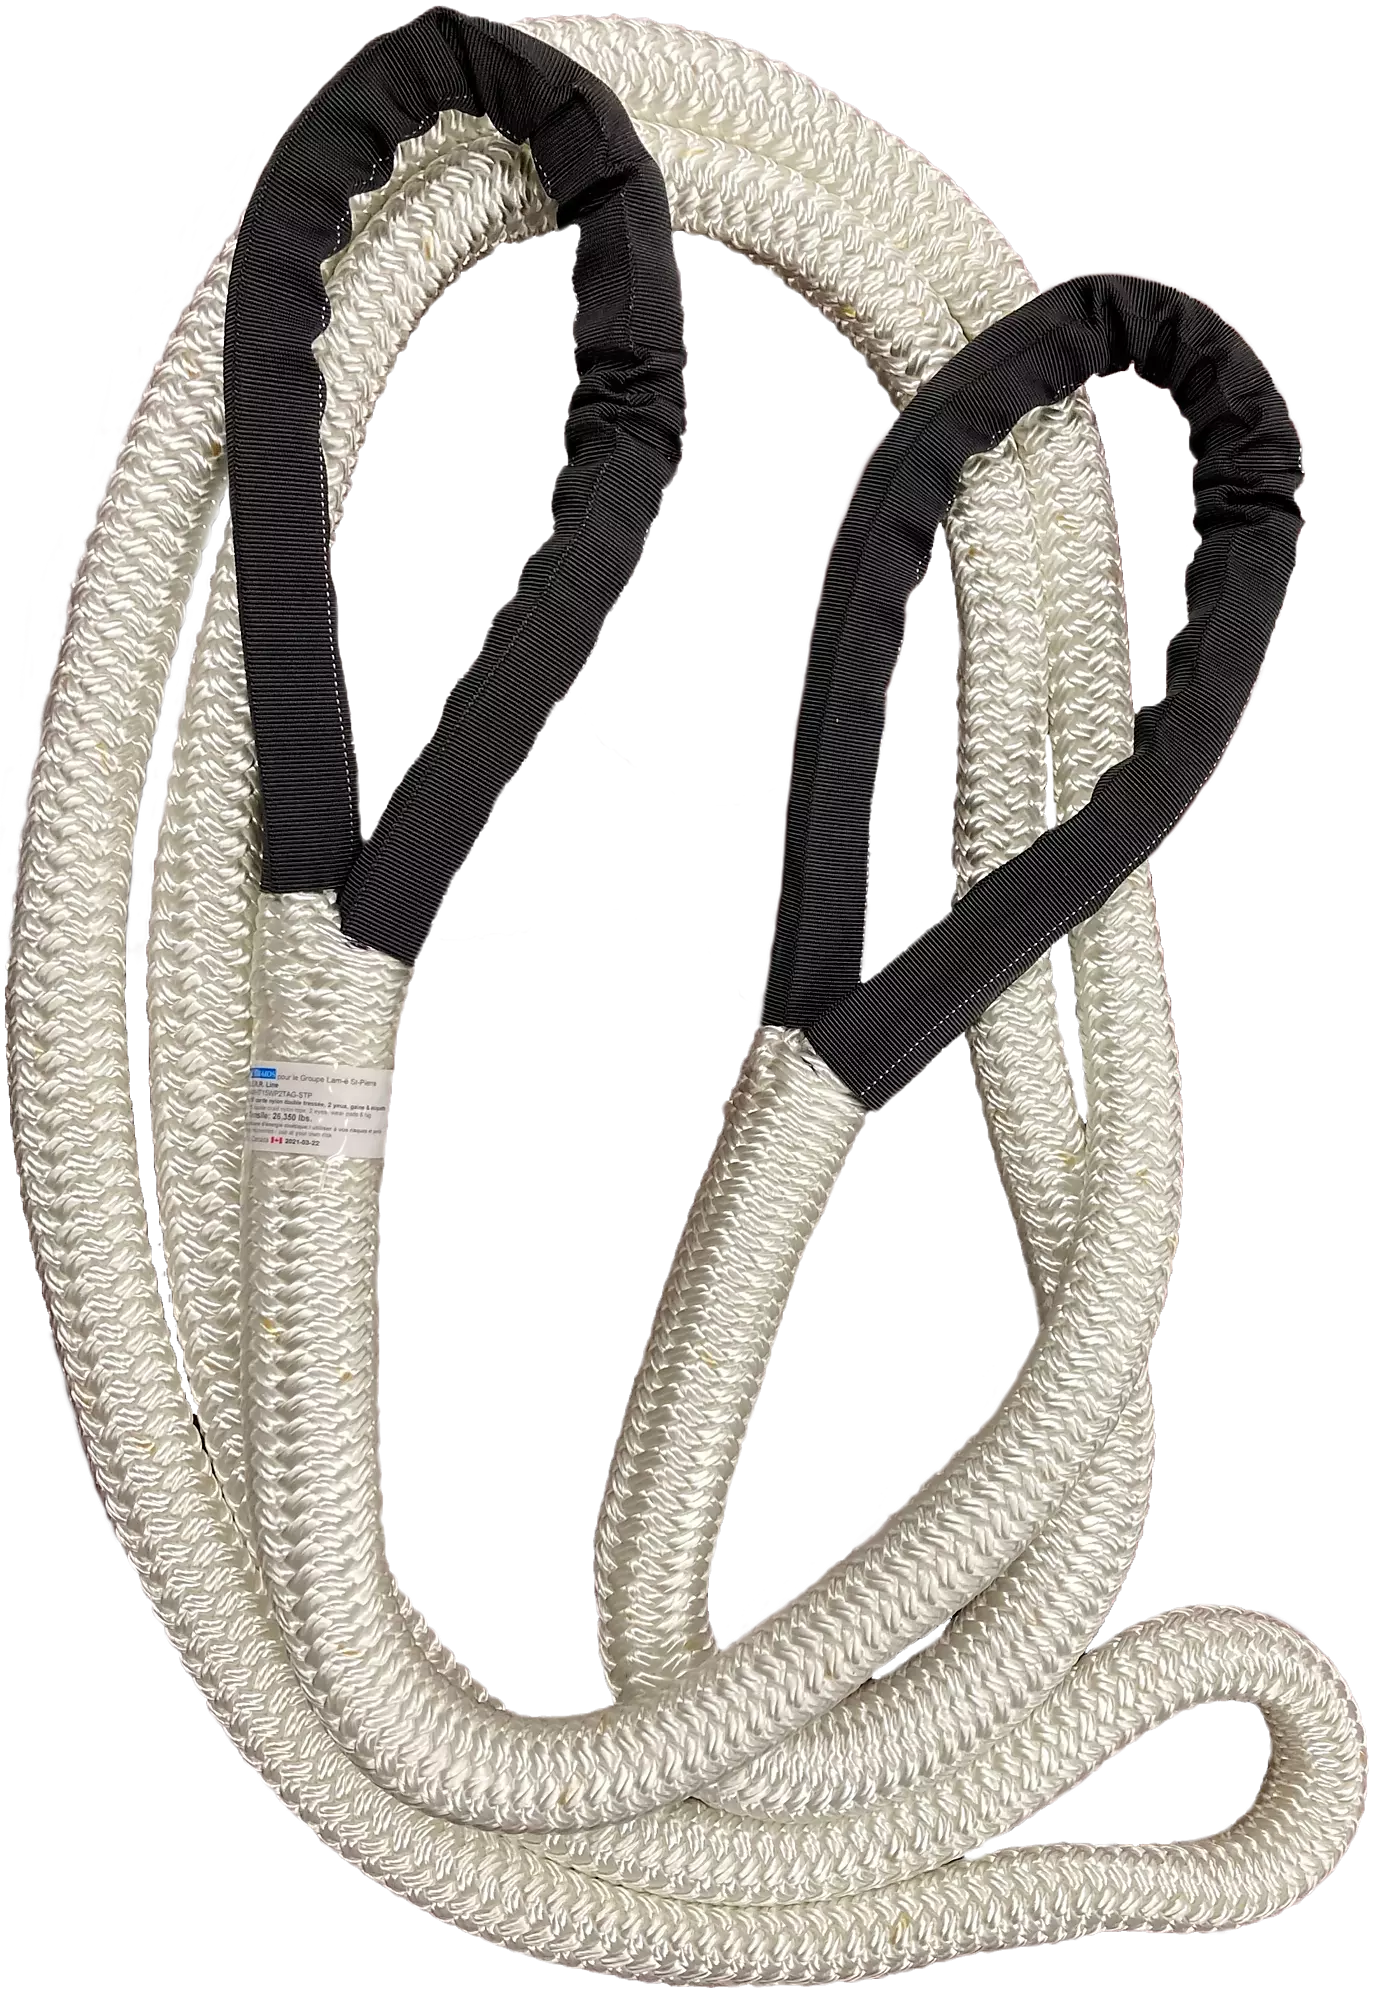 4 5mtr 8 Plait Kinetic Energy Recovery Rope K E R R